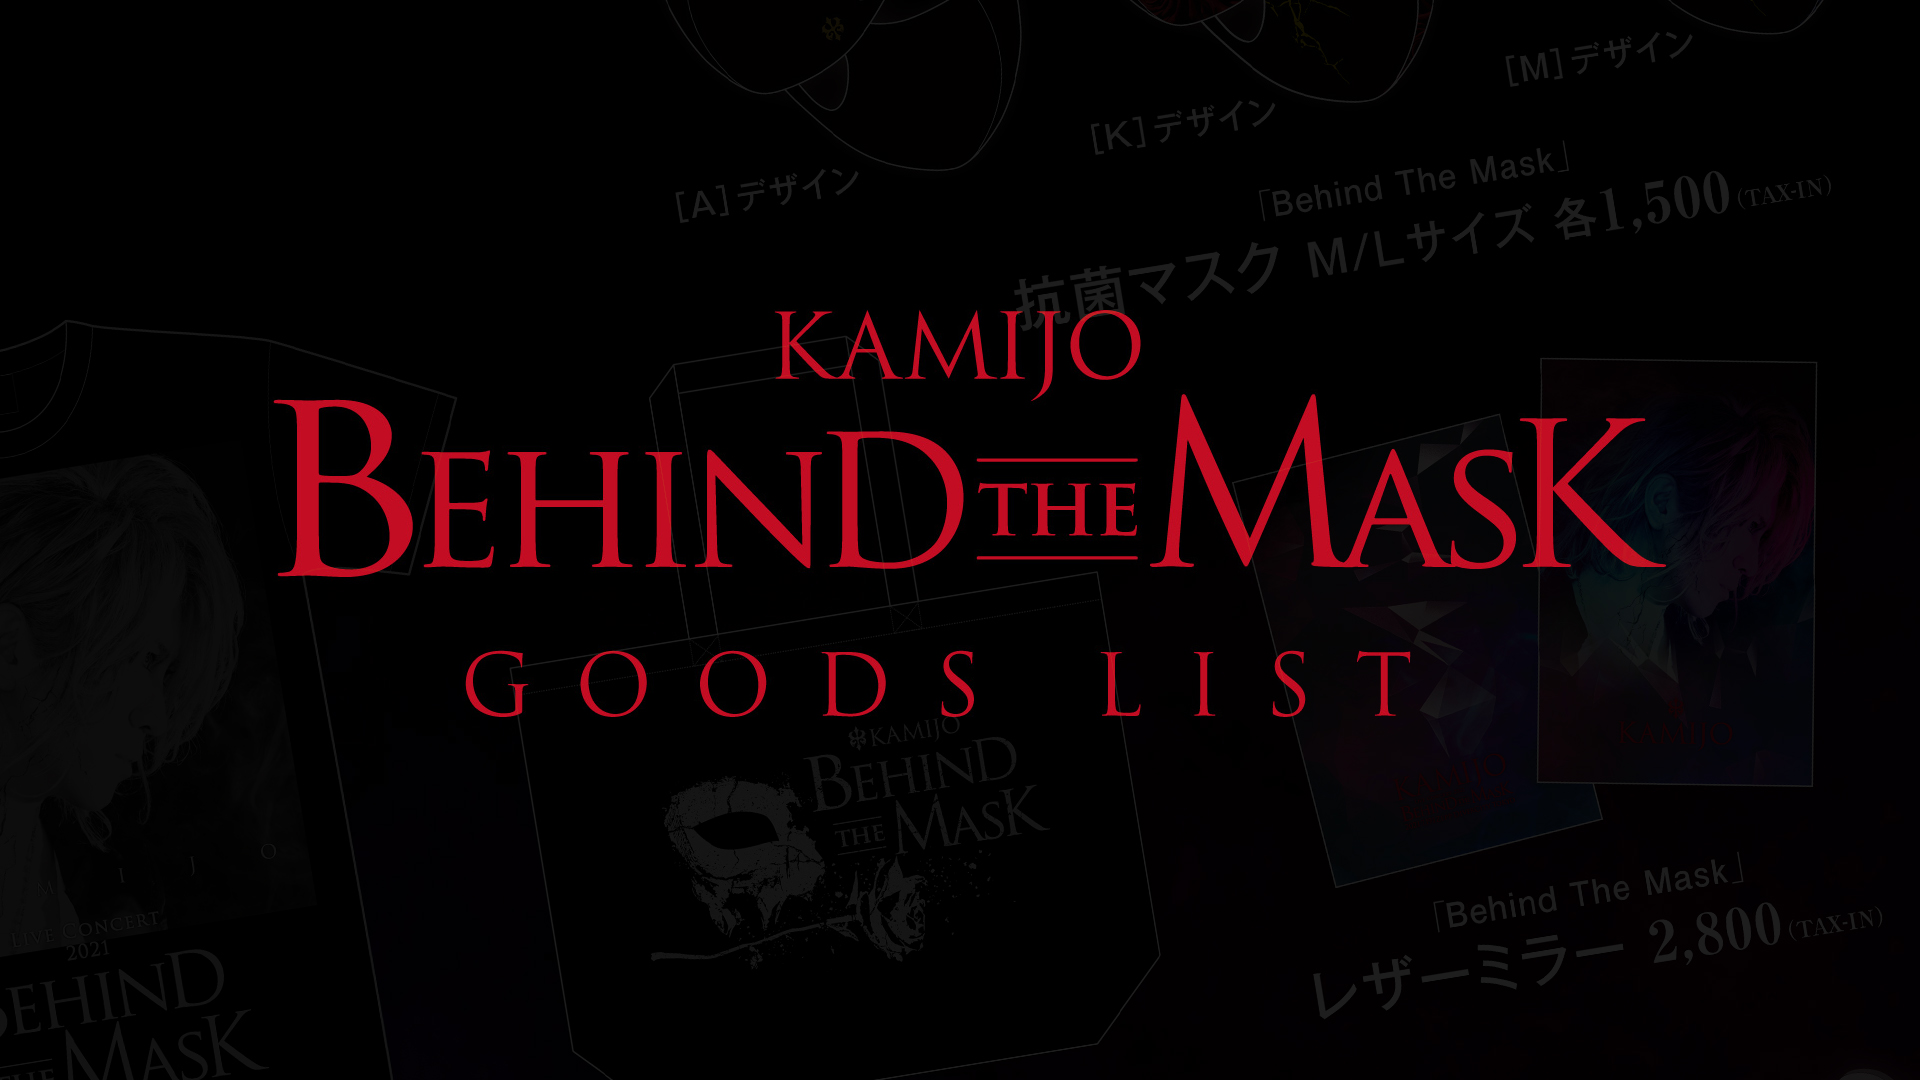 Behind the Mask goods